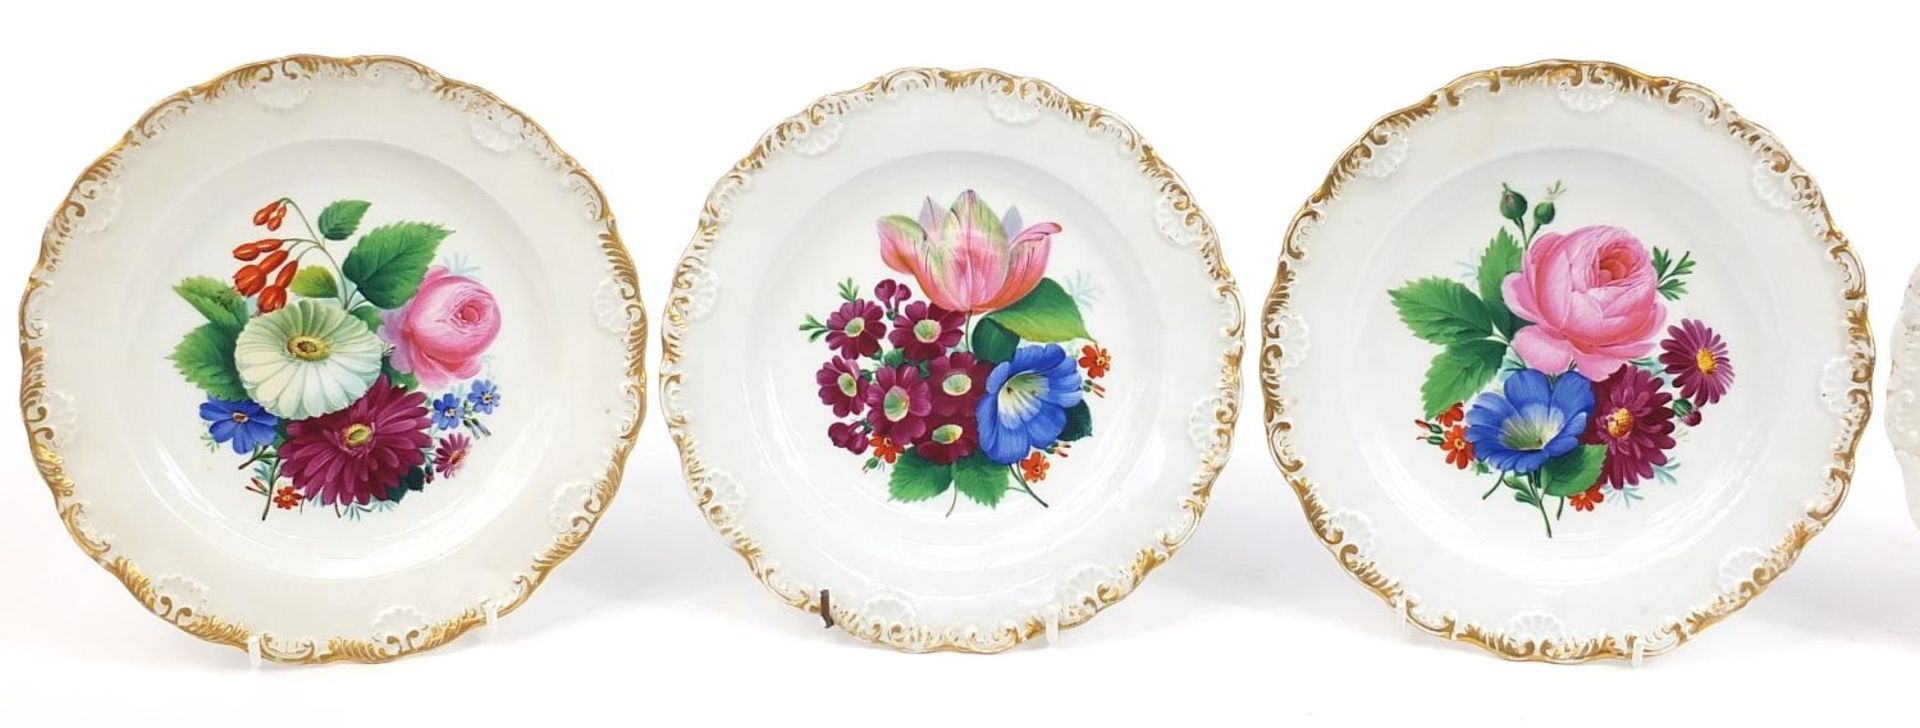 Meissen, set of six German porcelain plates hand painted with flowers, each 21cm in diameter - Image 2 of 5